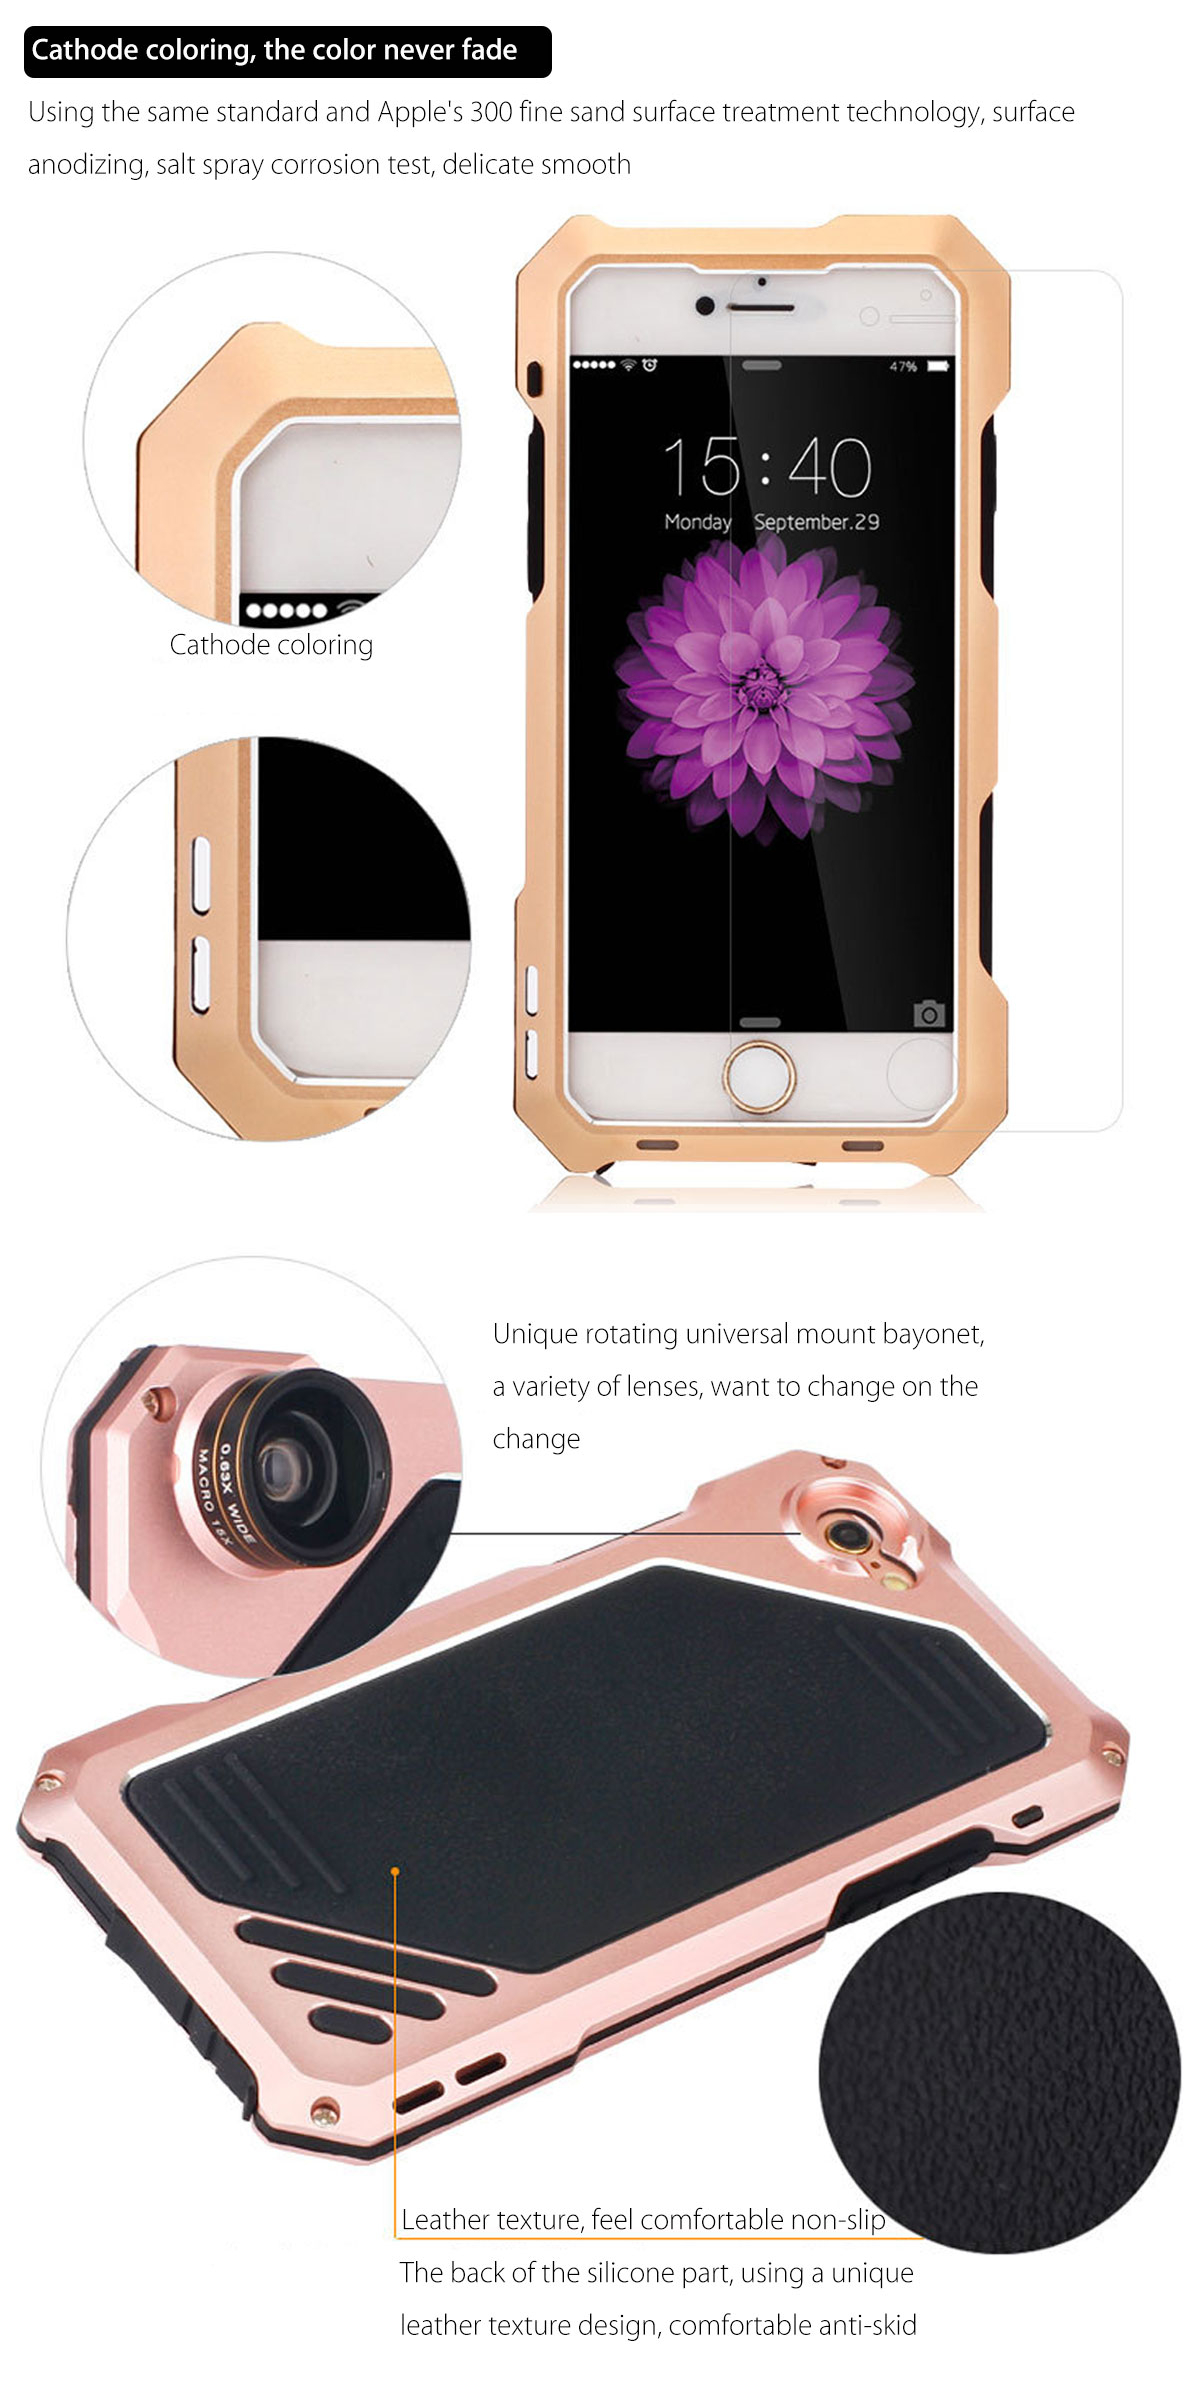 4-In-1-Waterproof-Case-Wide-Angle-Macro-Fisheye-Camera-Lens-For-iPhone-6--6s-Plus-55-Inches-1116025-8